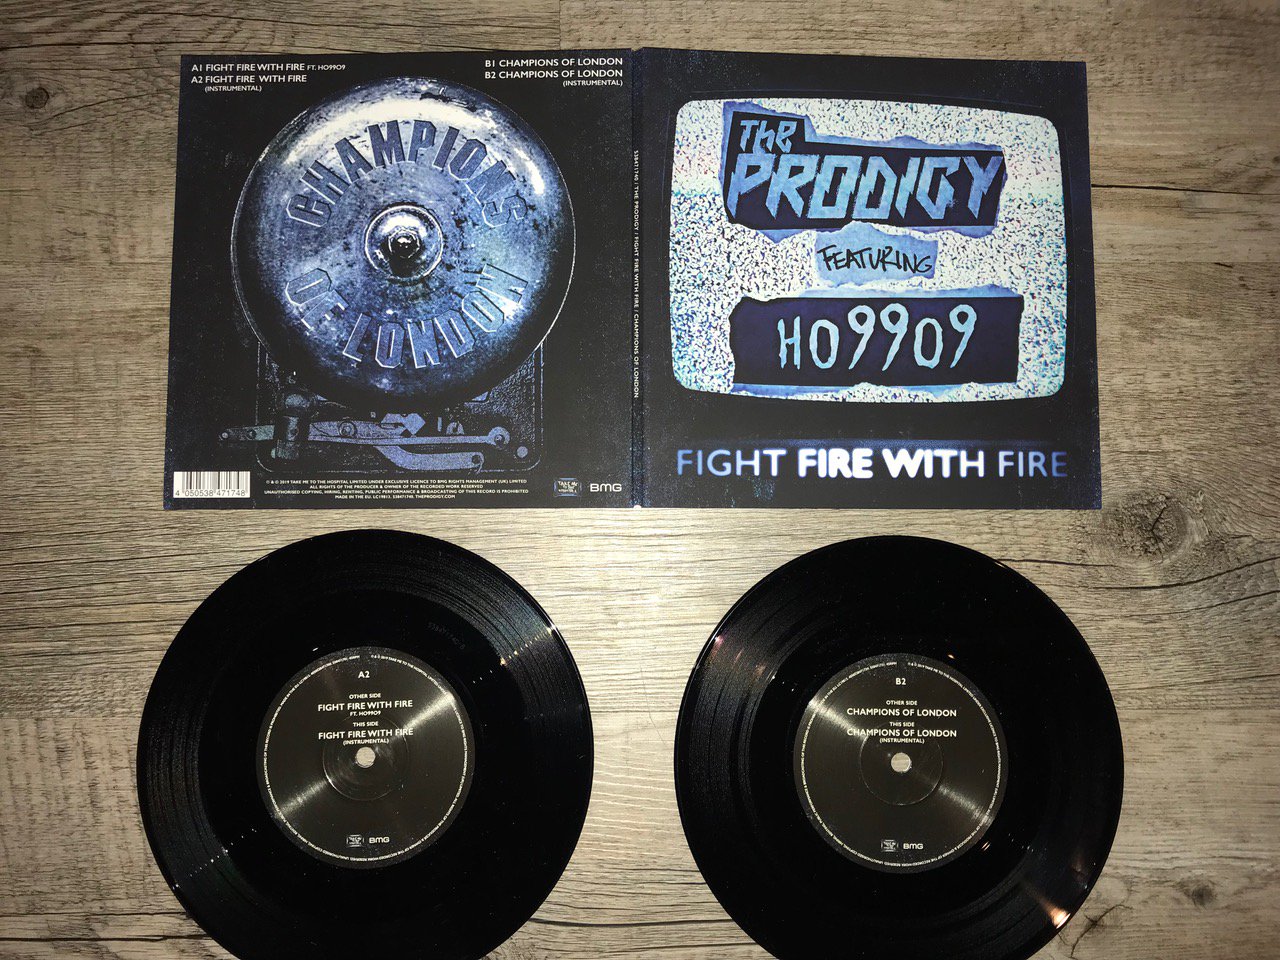 Kaptajn brie Spytte foretage The Prodigy on Twitter: "The Prodigy announce they will release a ltd  edition 7" for Record Store Day on 13th April Side A Fight Fire With Fire  feat. @ho99o9 Fight Fire With